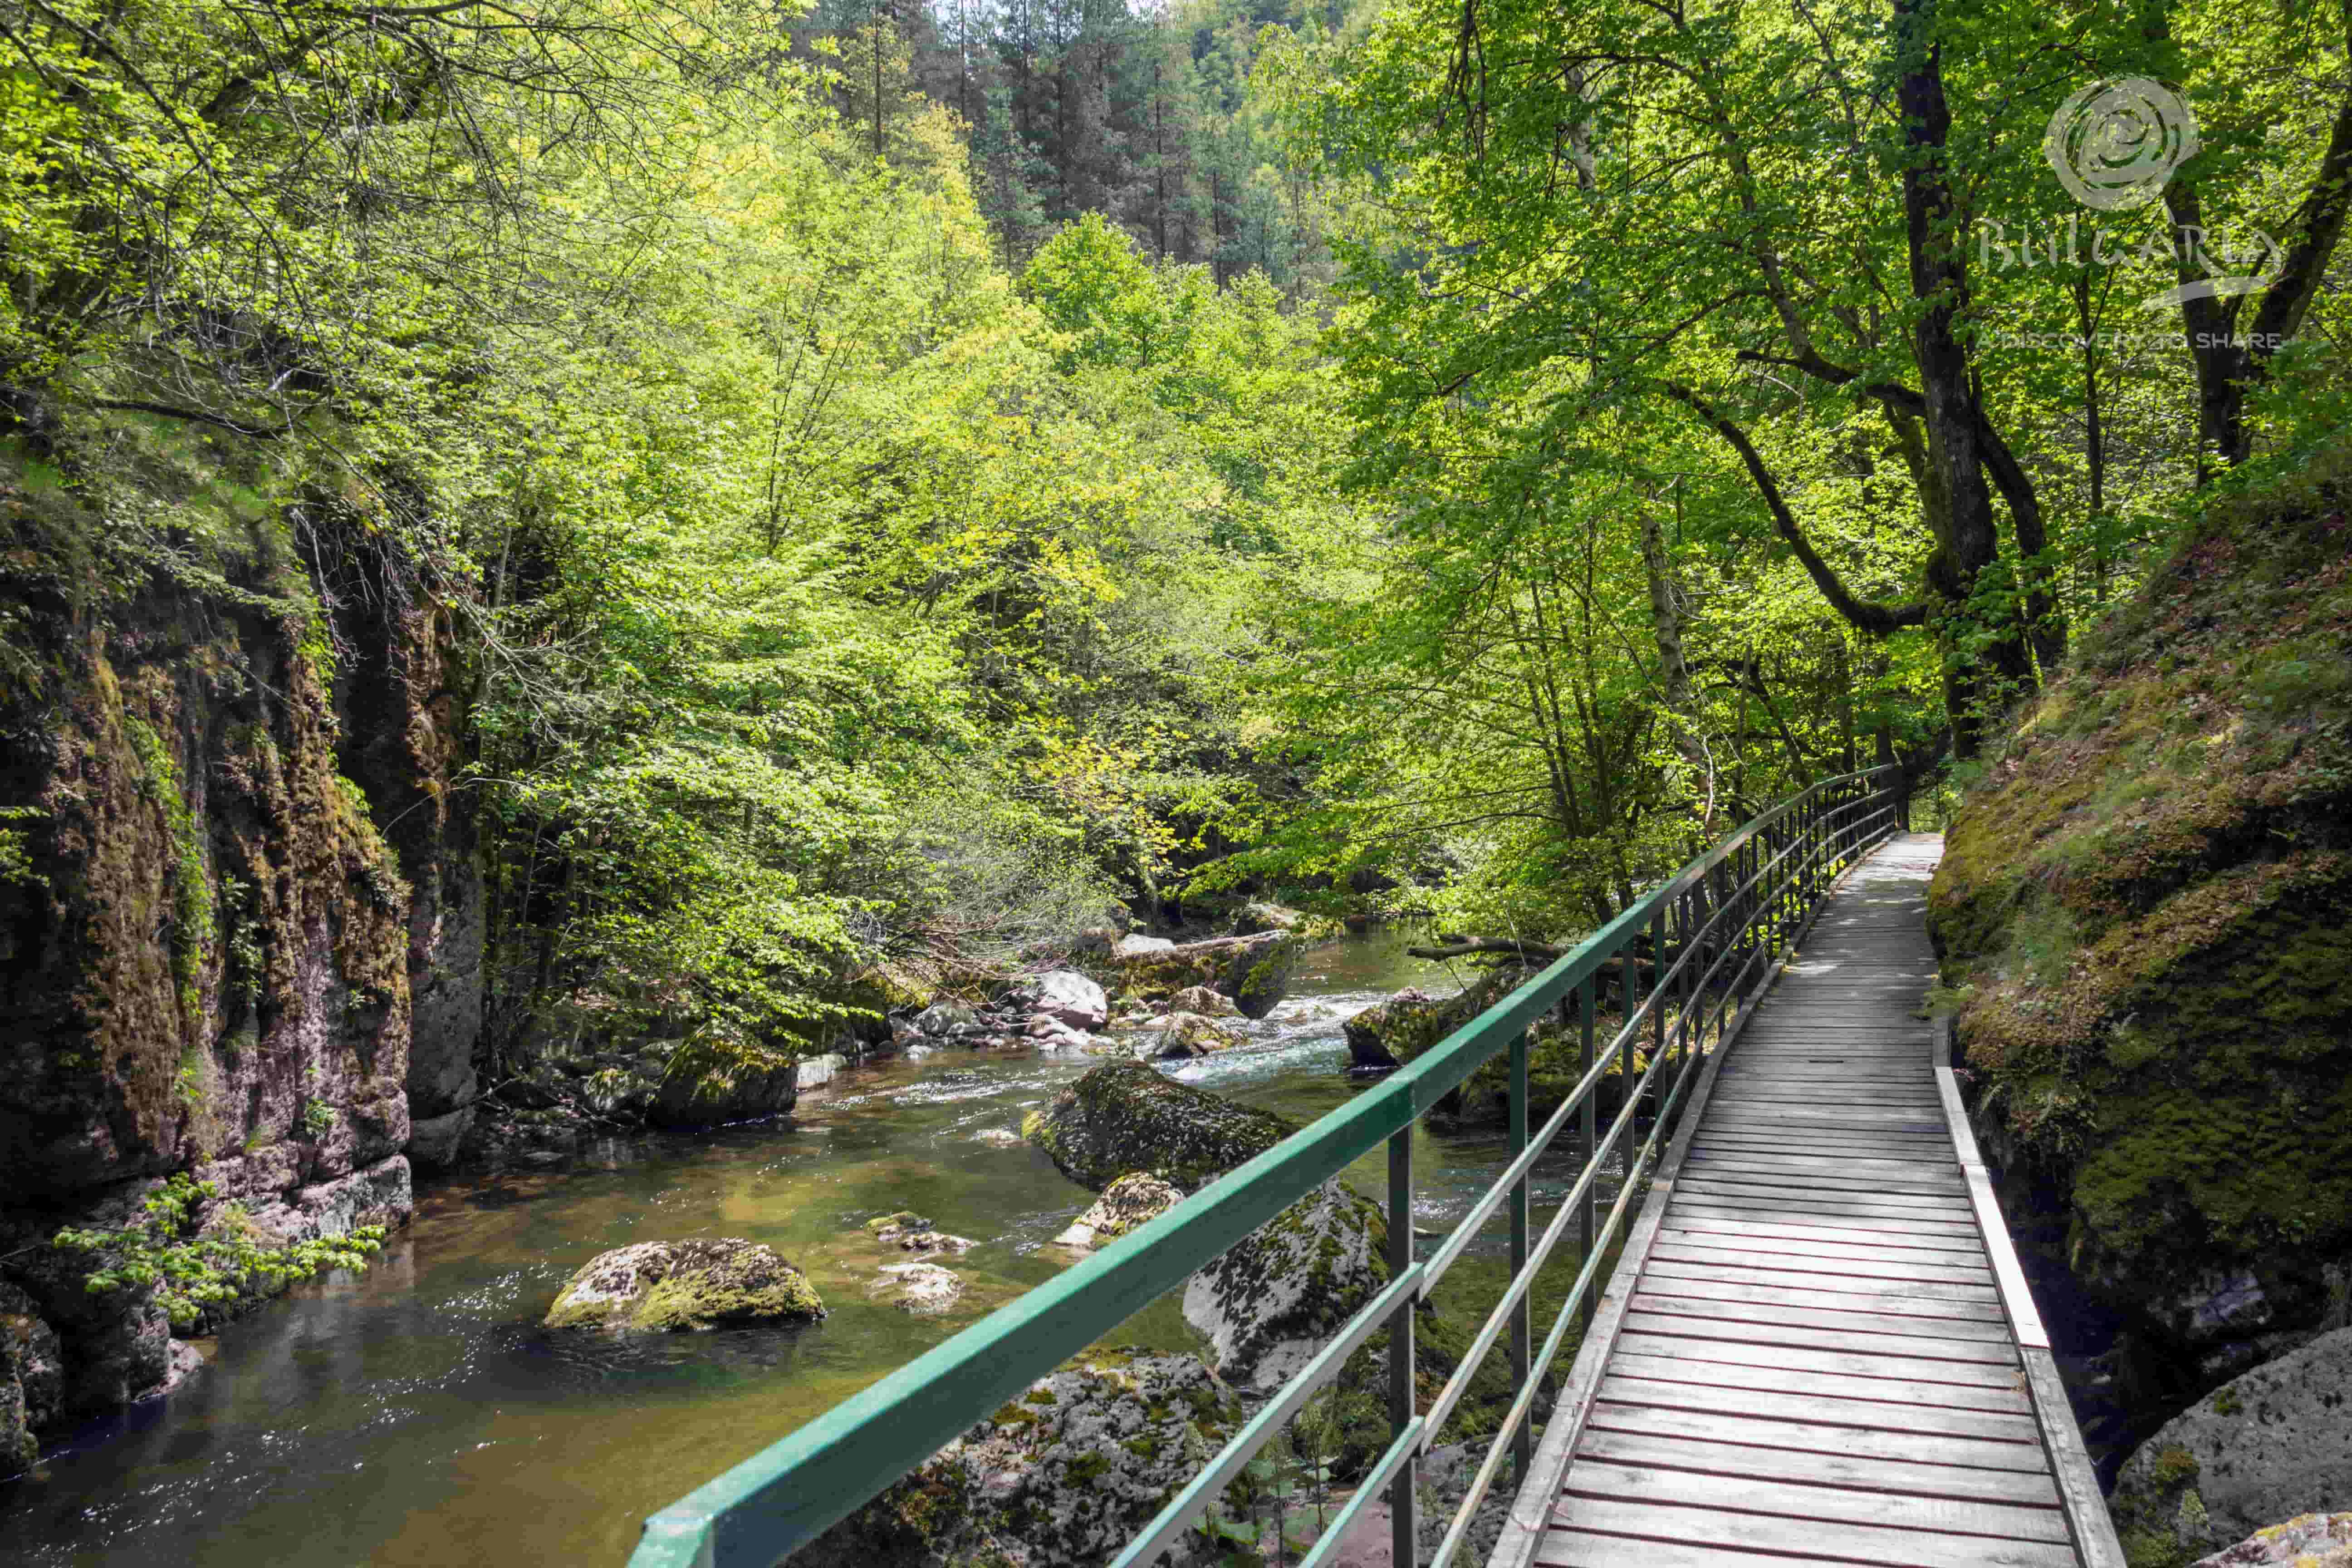 a wooden walkway over a river with trees